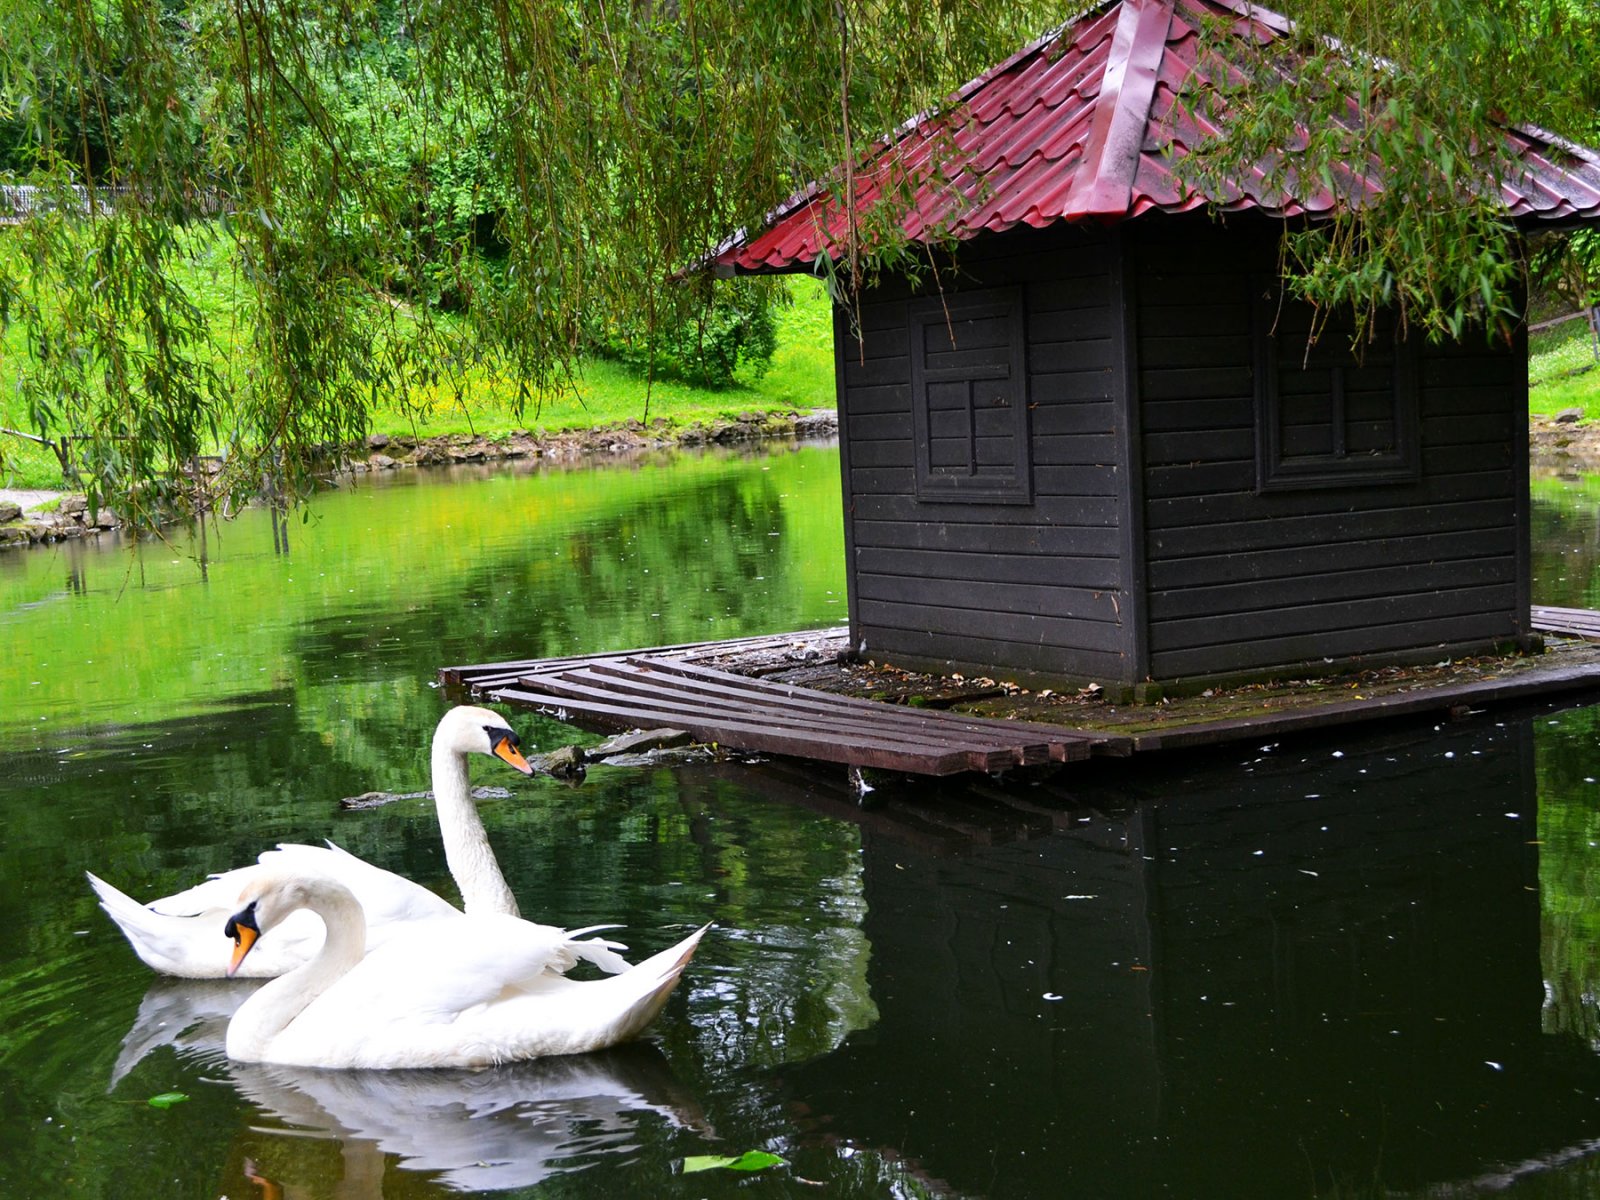 How to feed swans in Stryiskyi park in Lviv